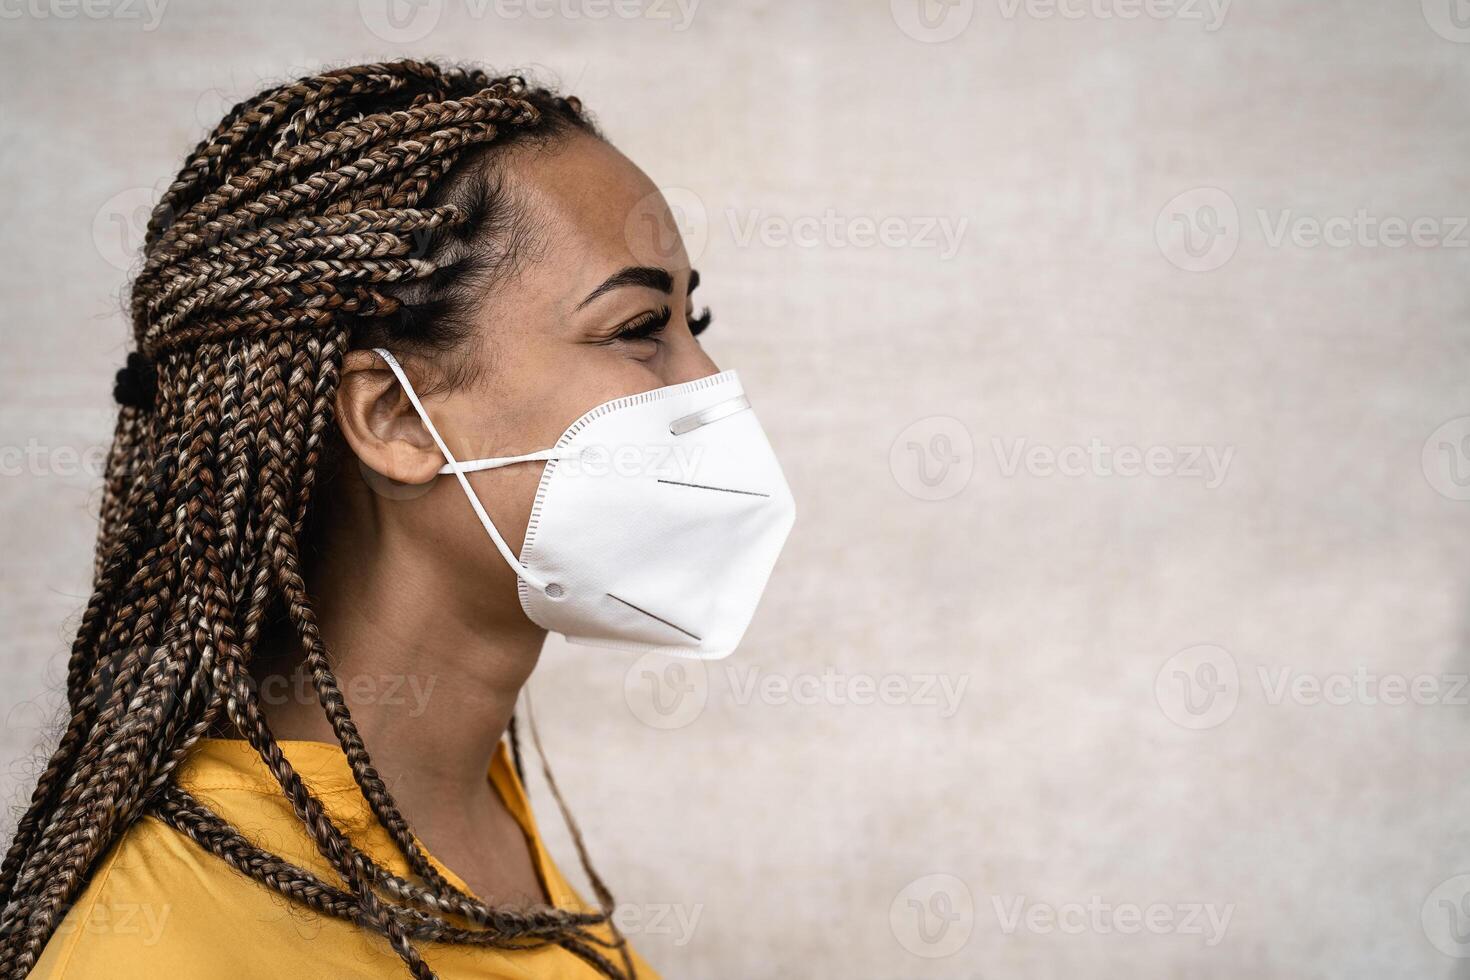 African woman with braids wearing face medical mask - Young girl using facemask for preventing and stop corona virus spread - Healthcare medical and youth millennial people concept photo